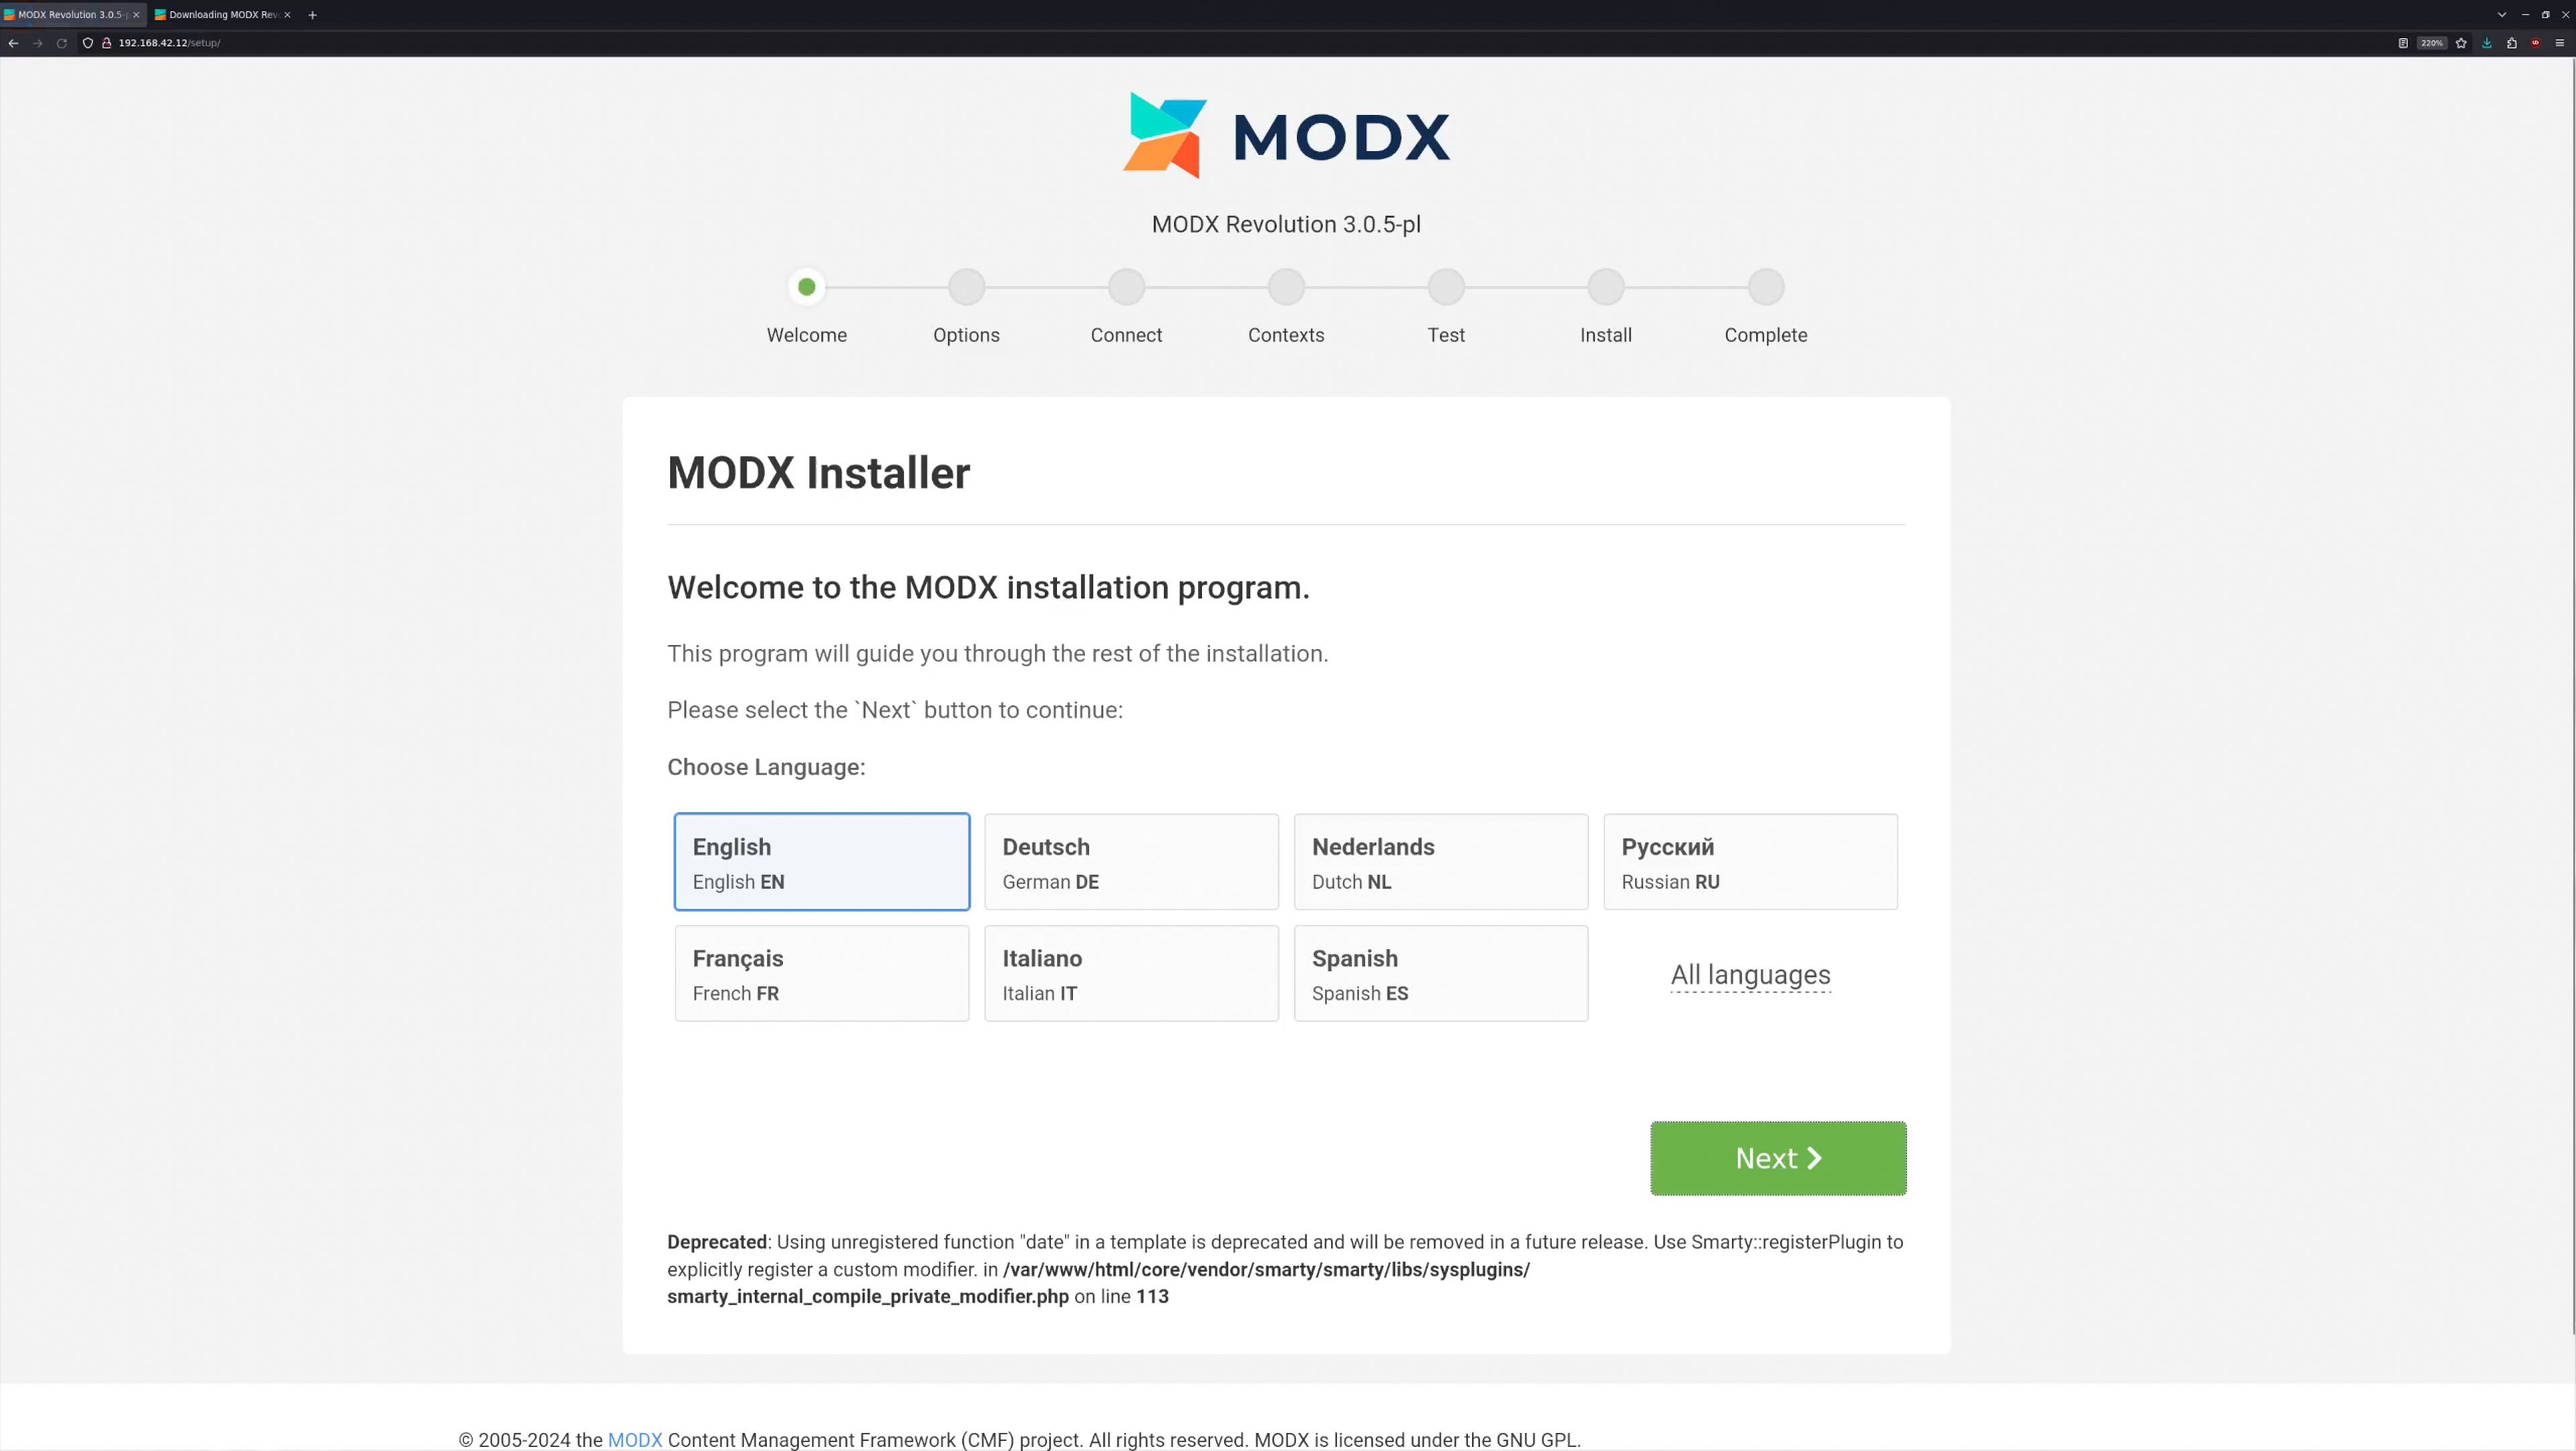 Back in the web browser, navigate to .../setup to get MODX installed.